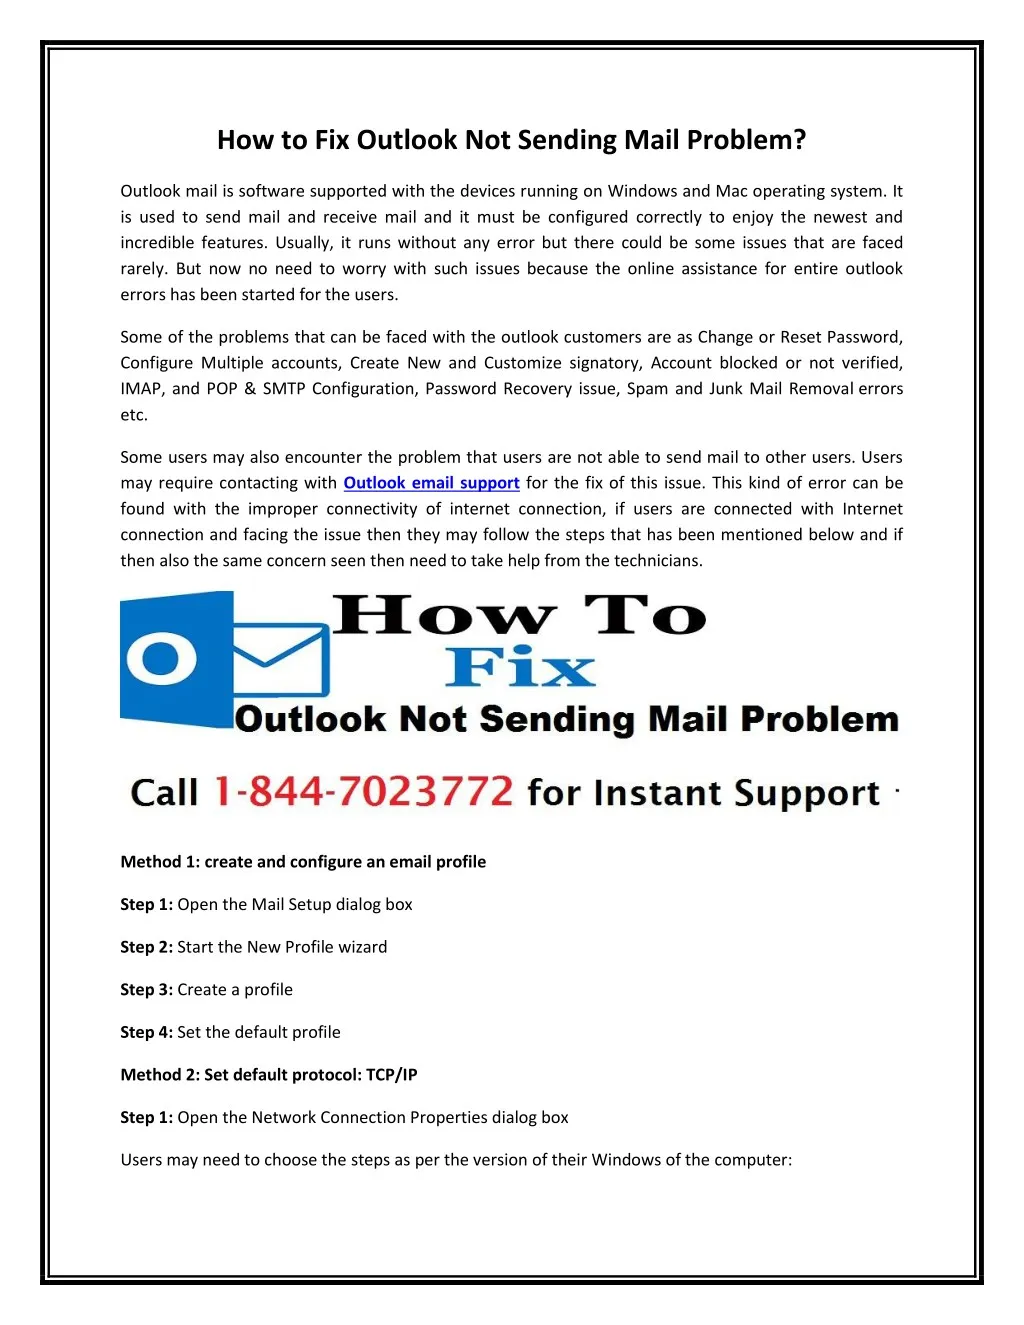 how to fix outlook not sending mail problem